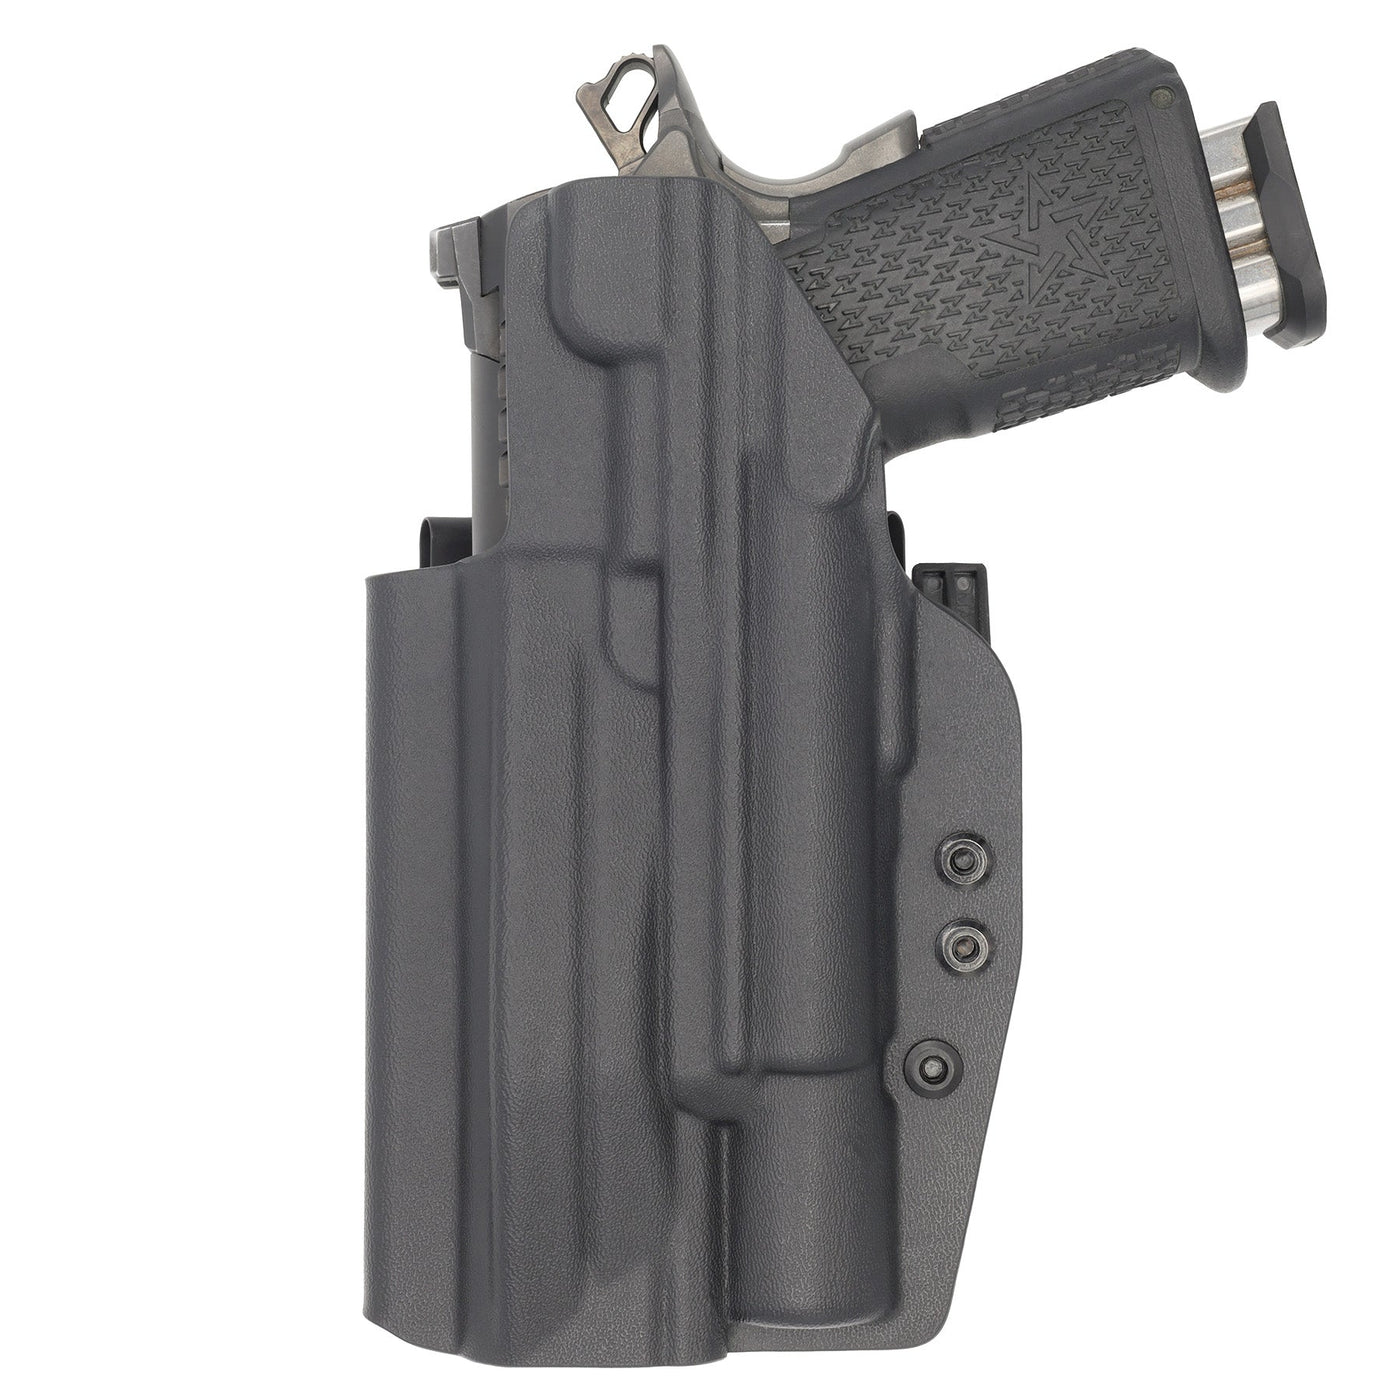 C&G Holsters Quickship IWB ALPHA UPGRADE Tactical 1911 DS Prodigy Surefire X300 in holstered position back view